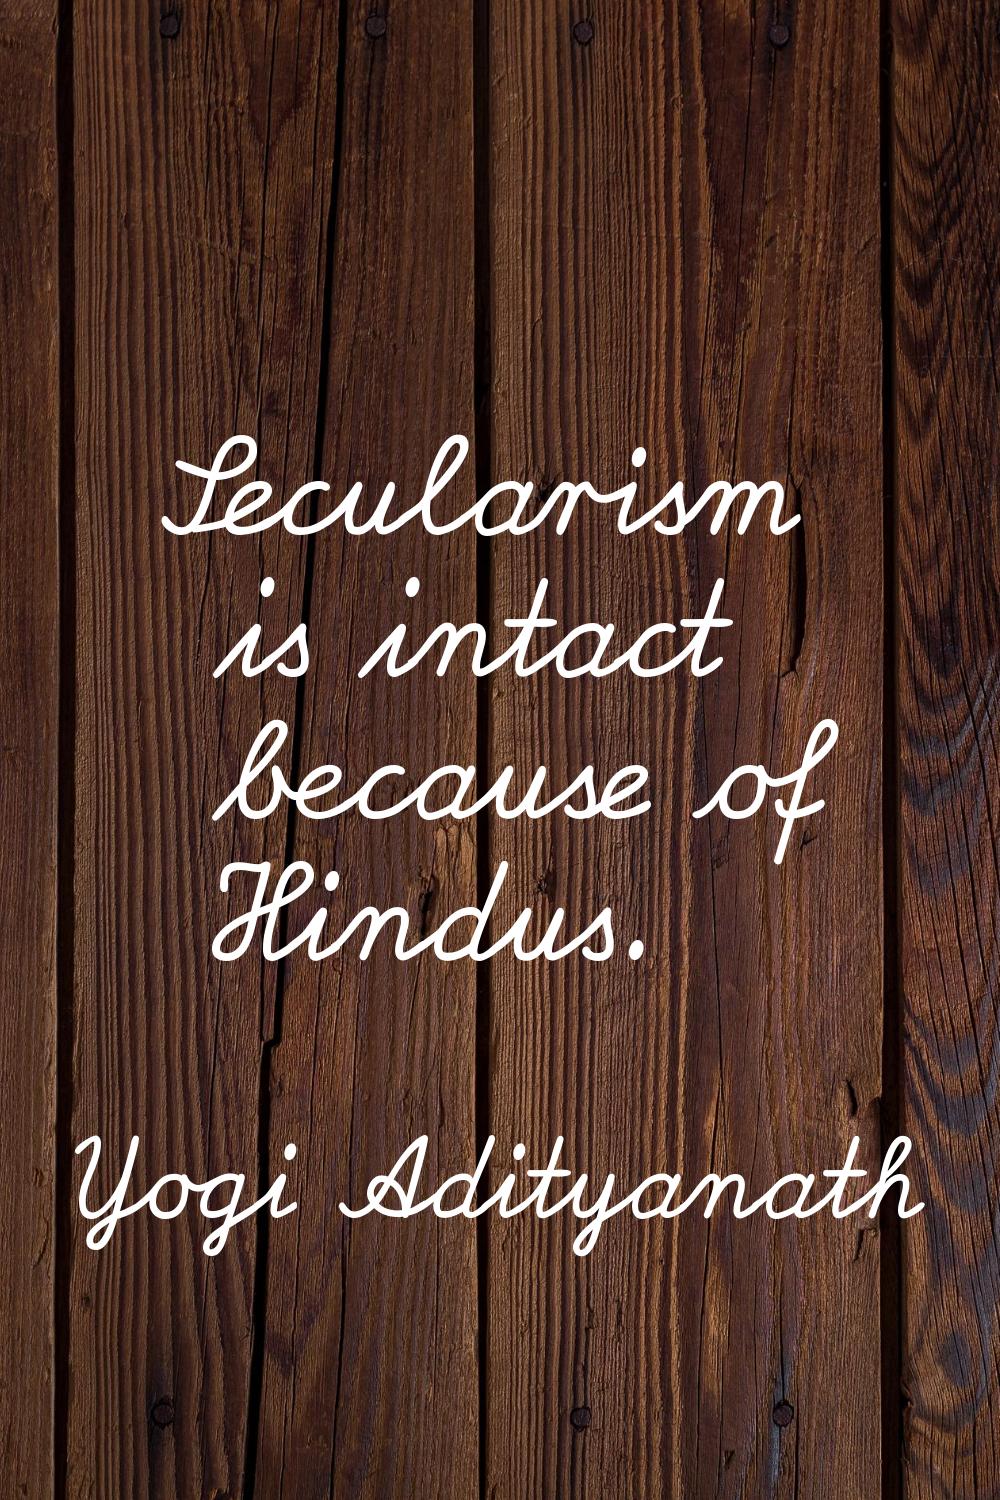 Secularism is intact because of Hindus.